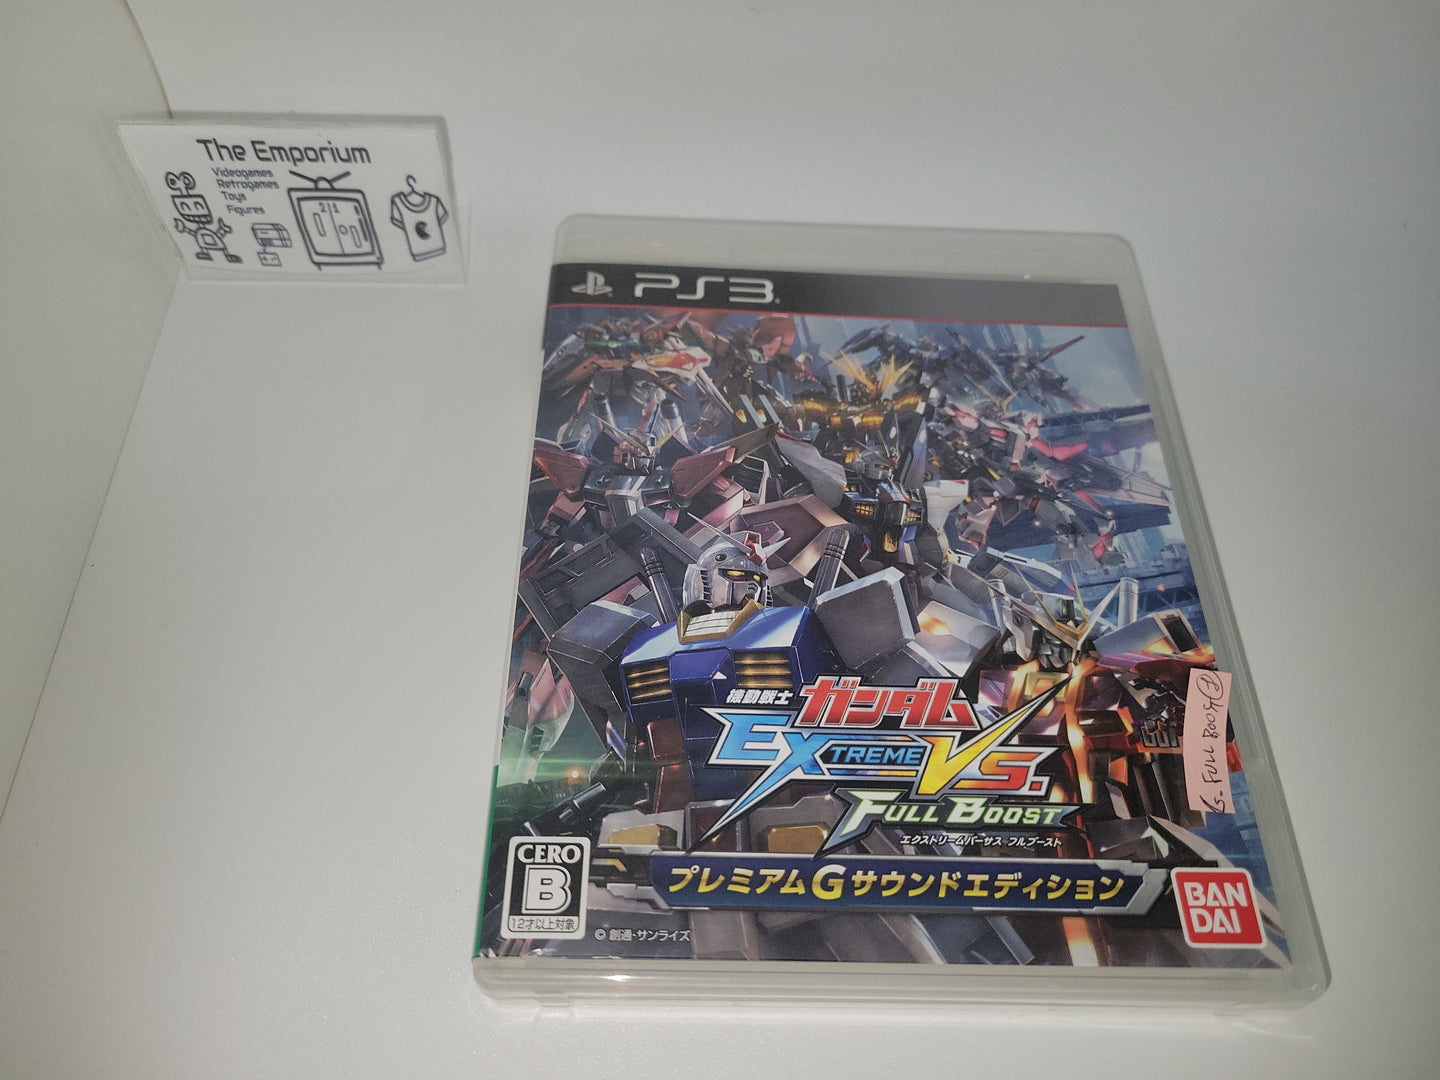 Mobile Suit Gundam Extreme VS. Full Boost [Premium G Sound Edition] - Sony PS3 Playstation 3